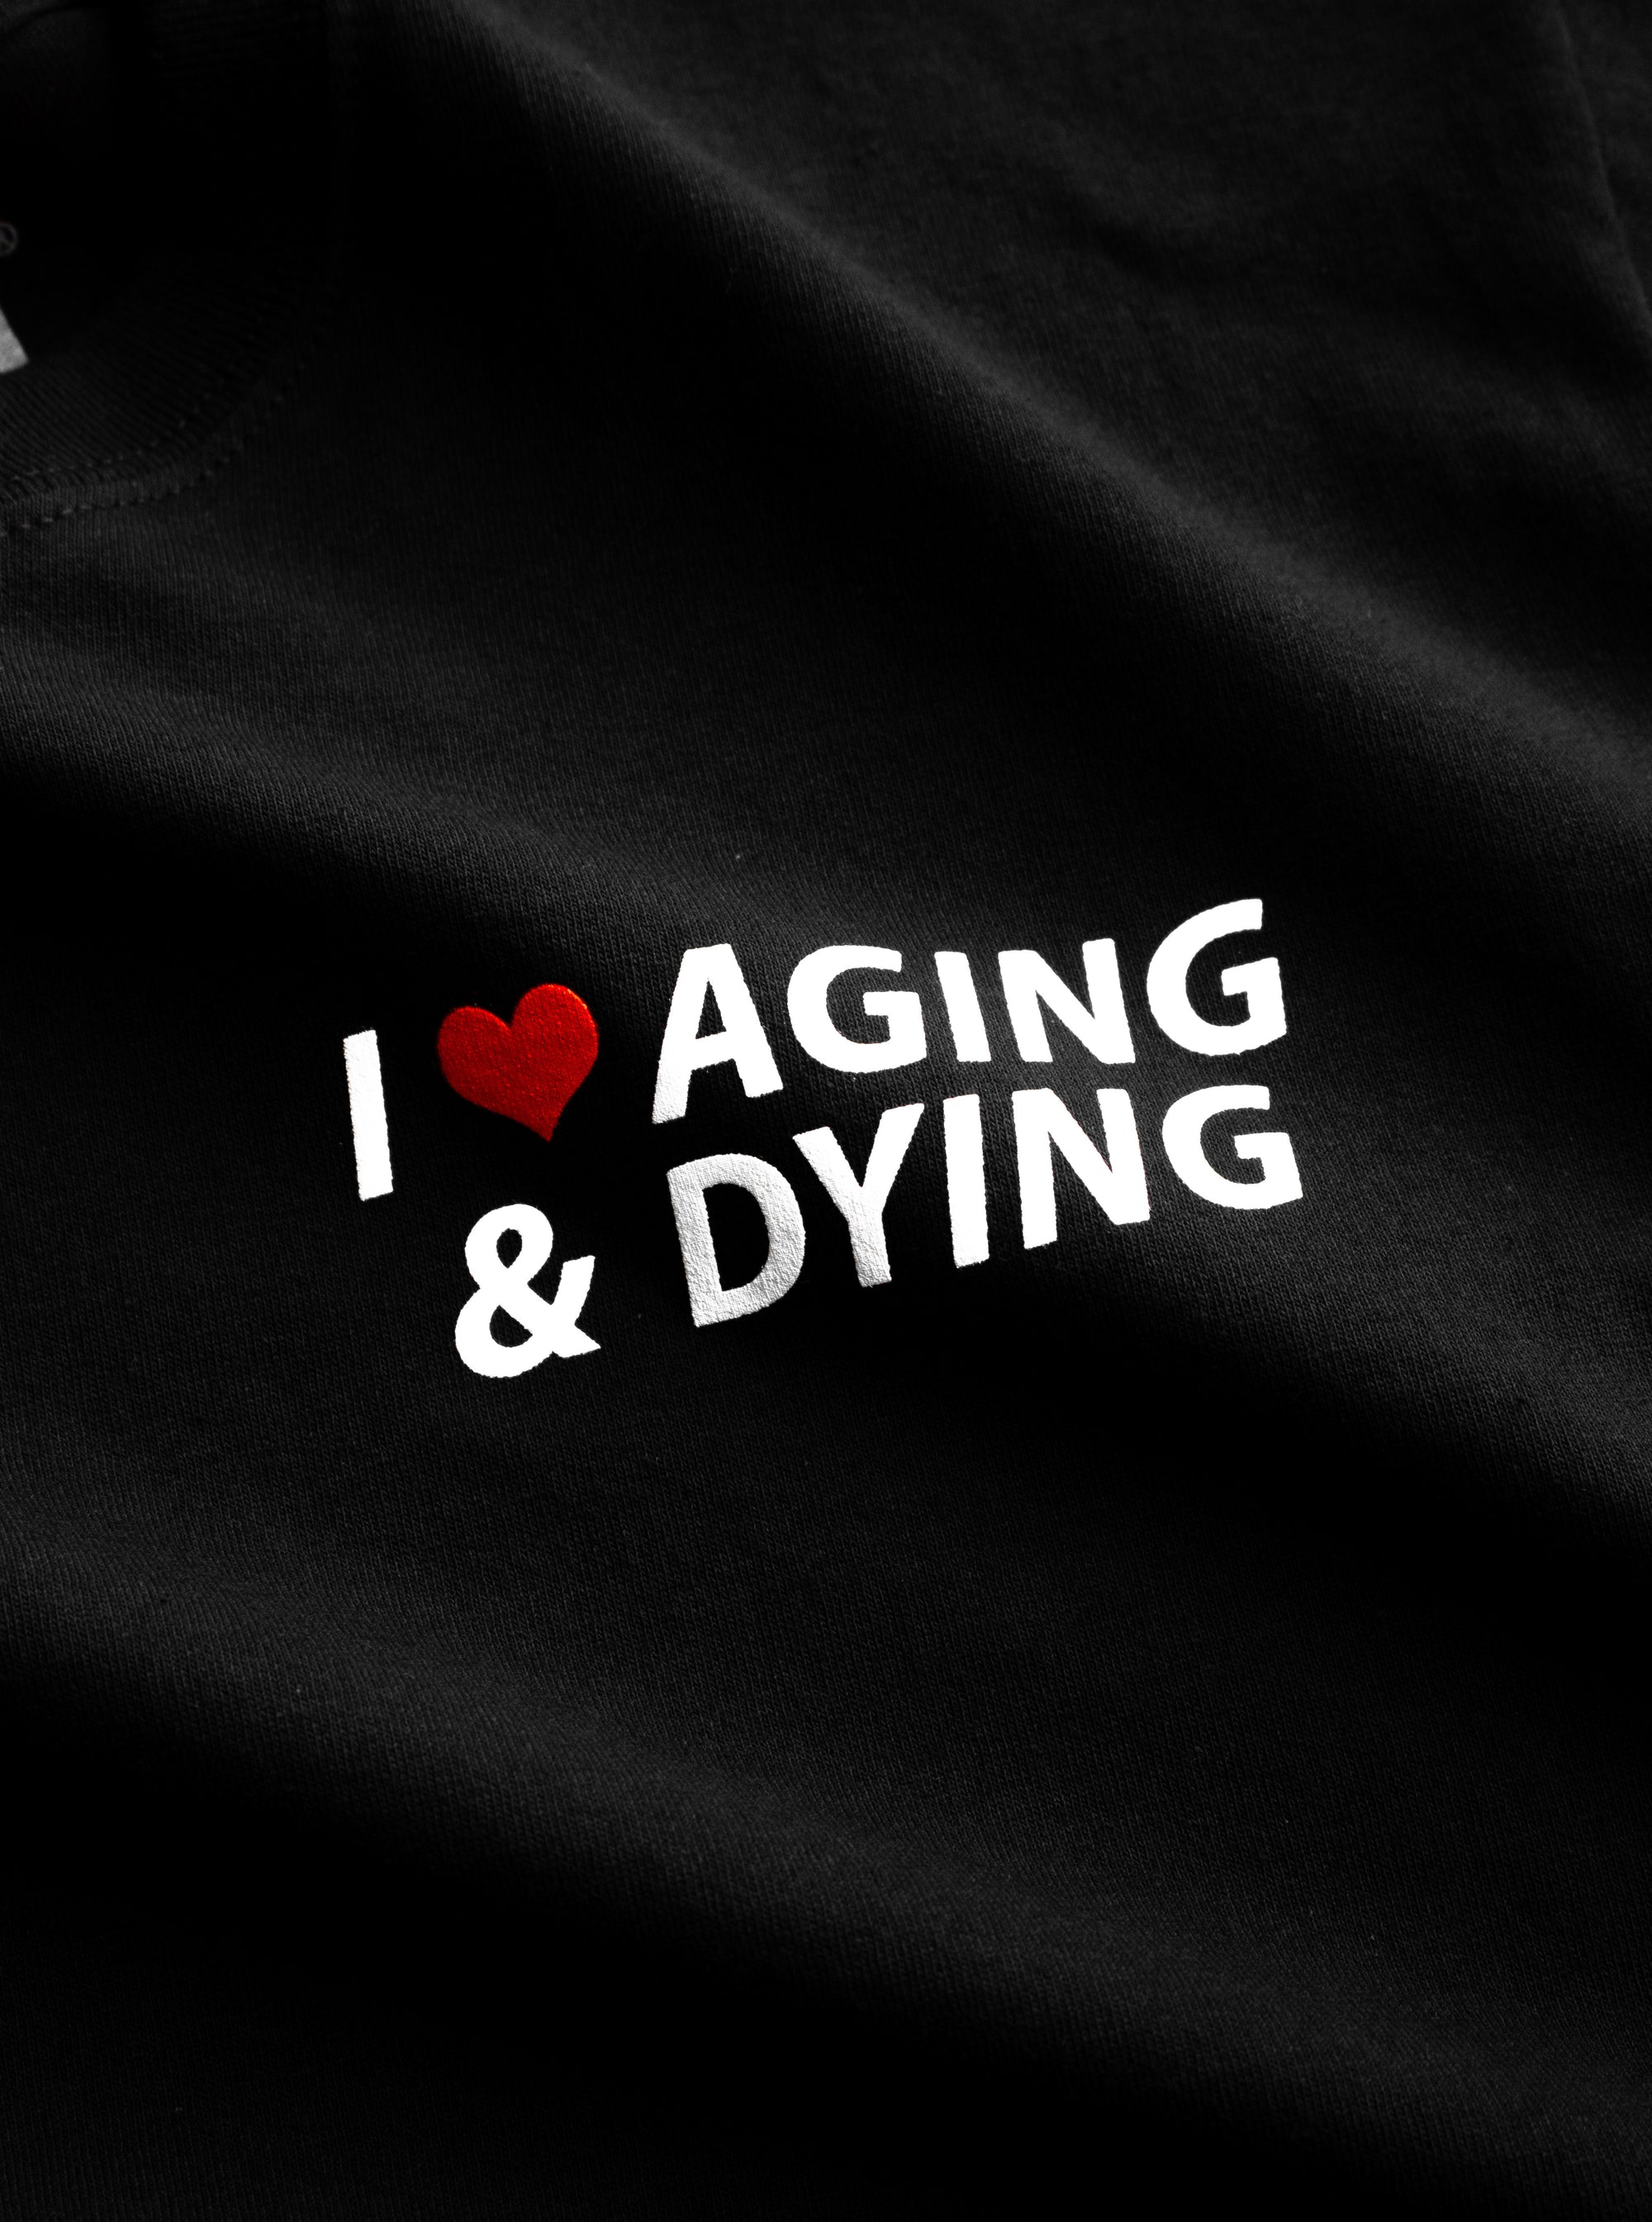 The original "Aging & Dying" T-shirt by No Fun®.  T-shirt is black, and is photographed close up to show the print detail.  The print text reads "I ❤️ Aging & Dying" and is located on the front of the T-shirt.   The text is white, with a red heart.